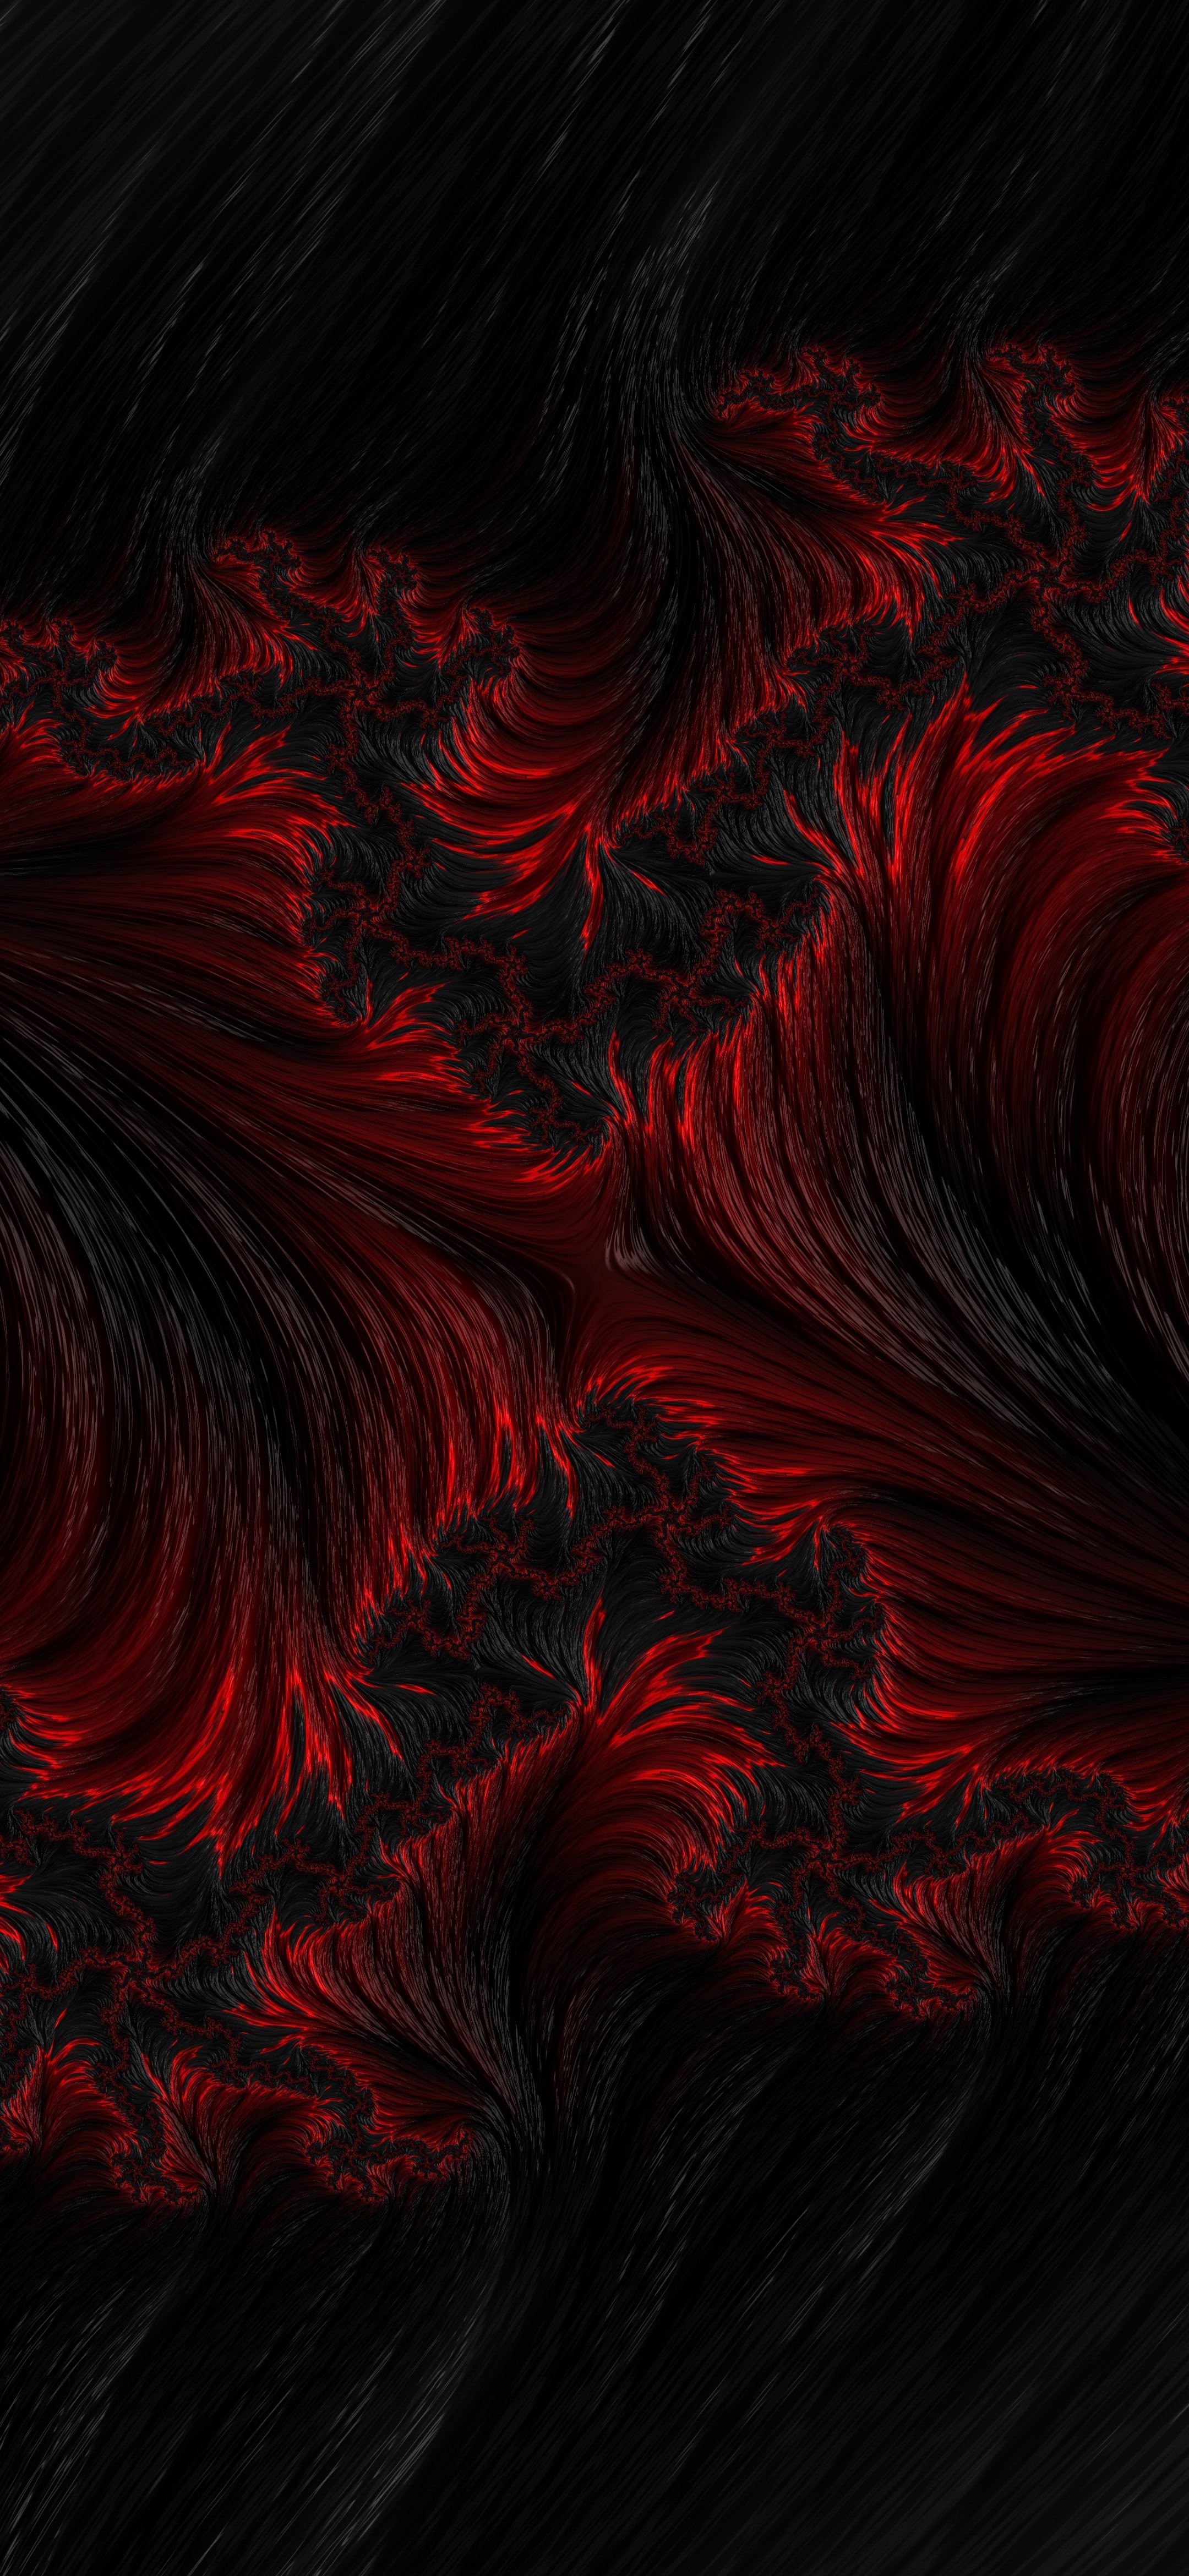 wavy, black, abstract, red, fractal 4K